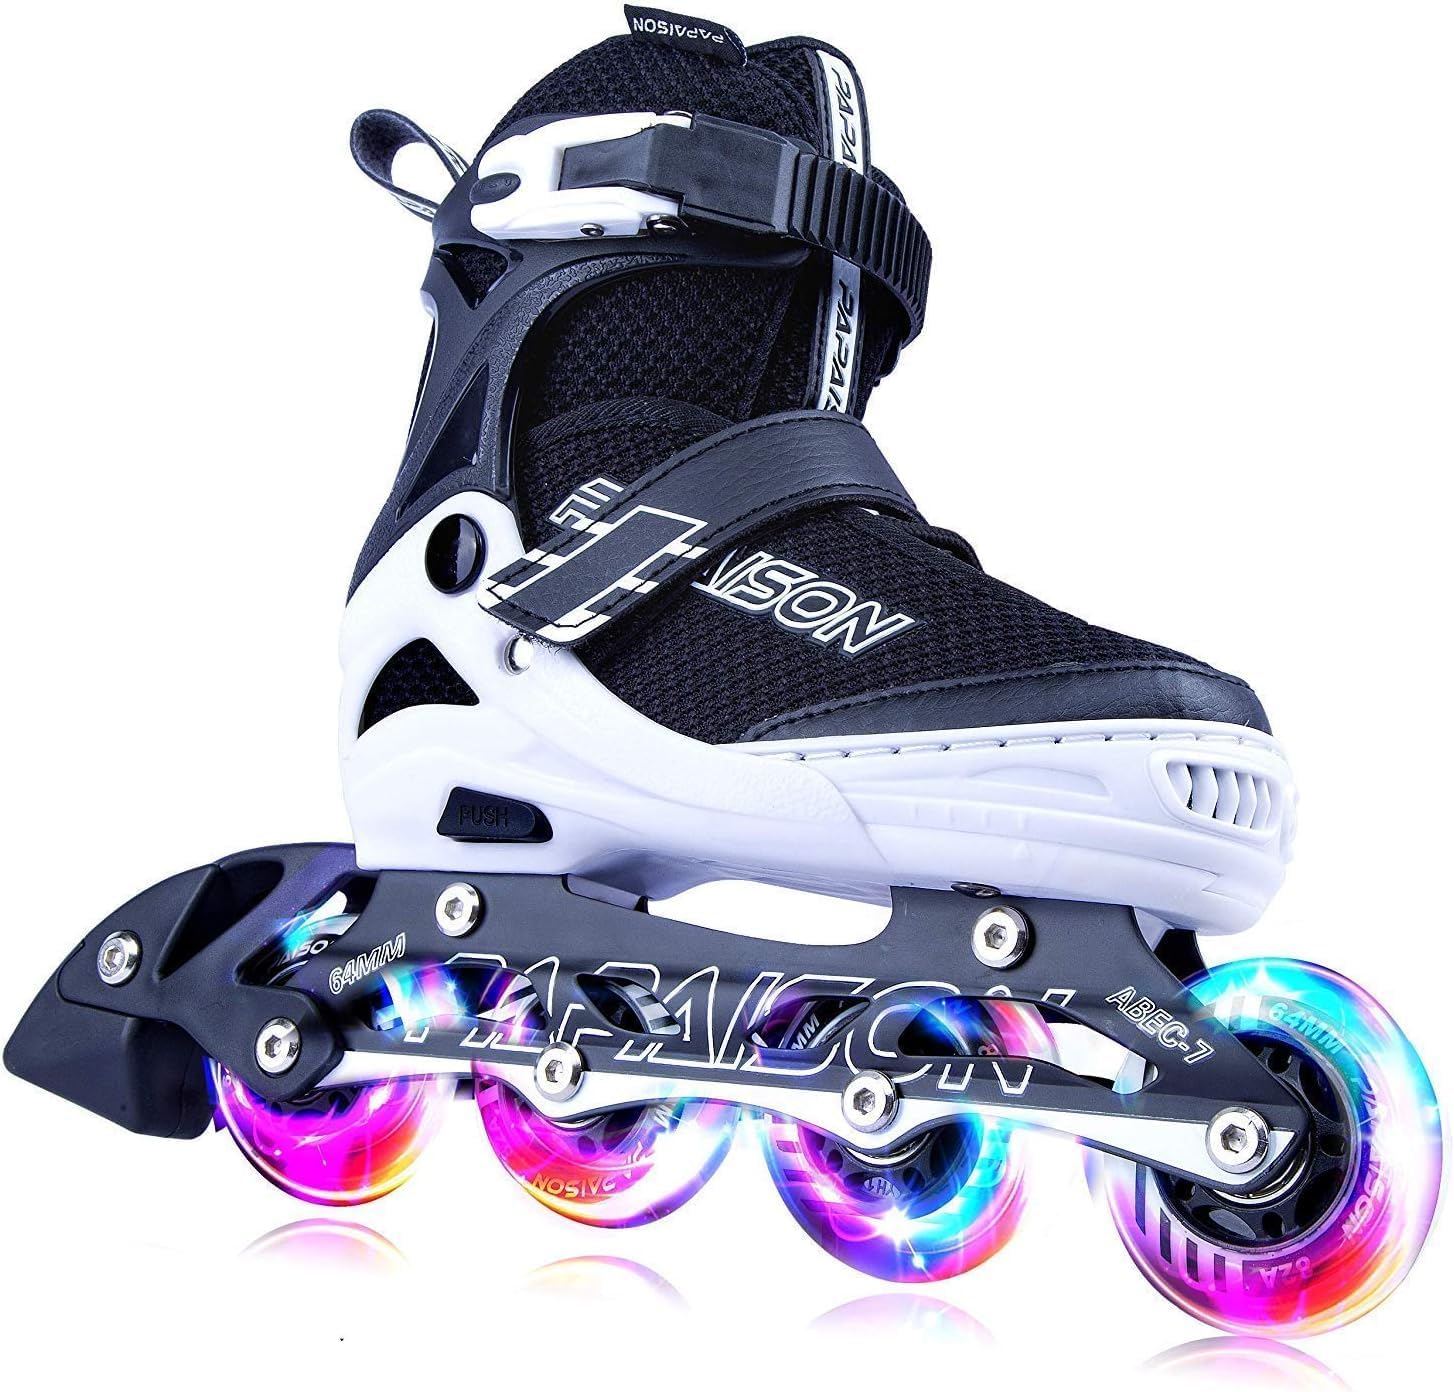 Ive only had these skates for a few days and just got a chance to try them today with all my protective gear. They are super comfortable and secure on my feet. I went ass over tin cup half a dozen times because its been about twenty years since I last roller-bladed, but Im starting to get the hang of it! I normally wear either an 8 or 8.5-size womens shoe (depending on the brand) and ordered the Large size (listed as Youth & Adult 4-7 US). These fit me perfectly! The lights are a nice feature- Im sure Ill be the coolest 30-something-year-old woman at the rink.